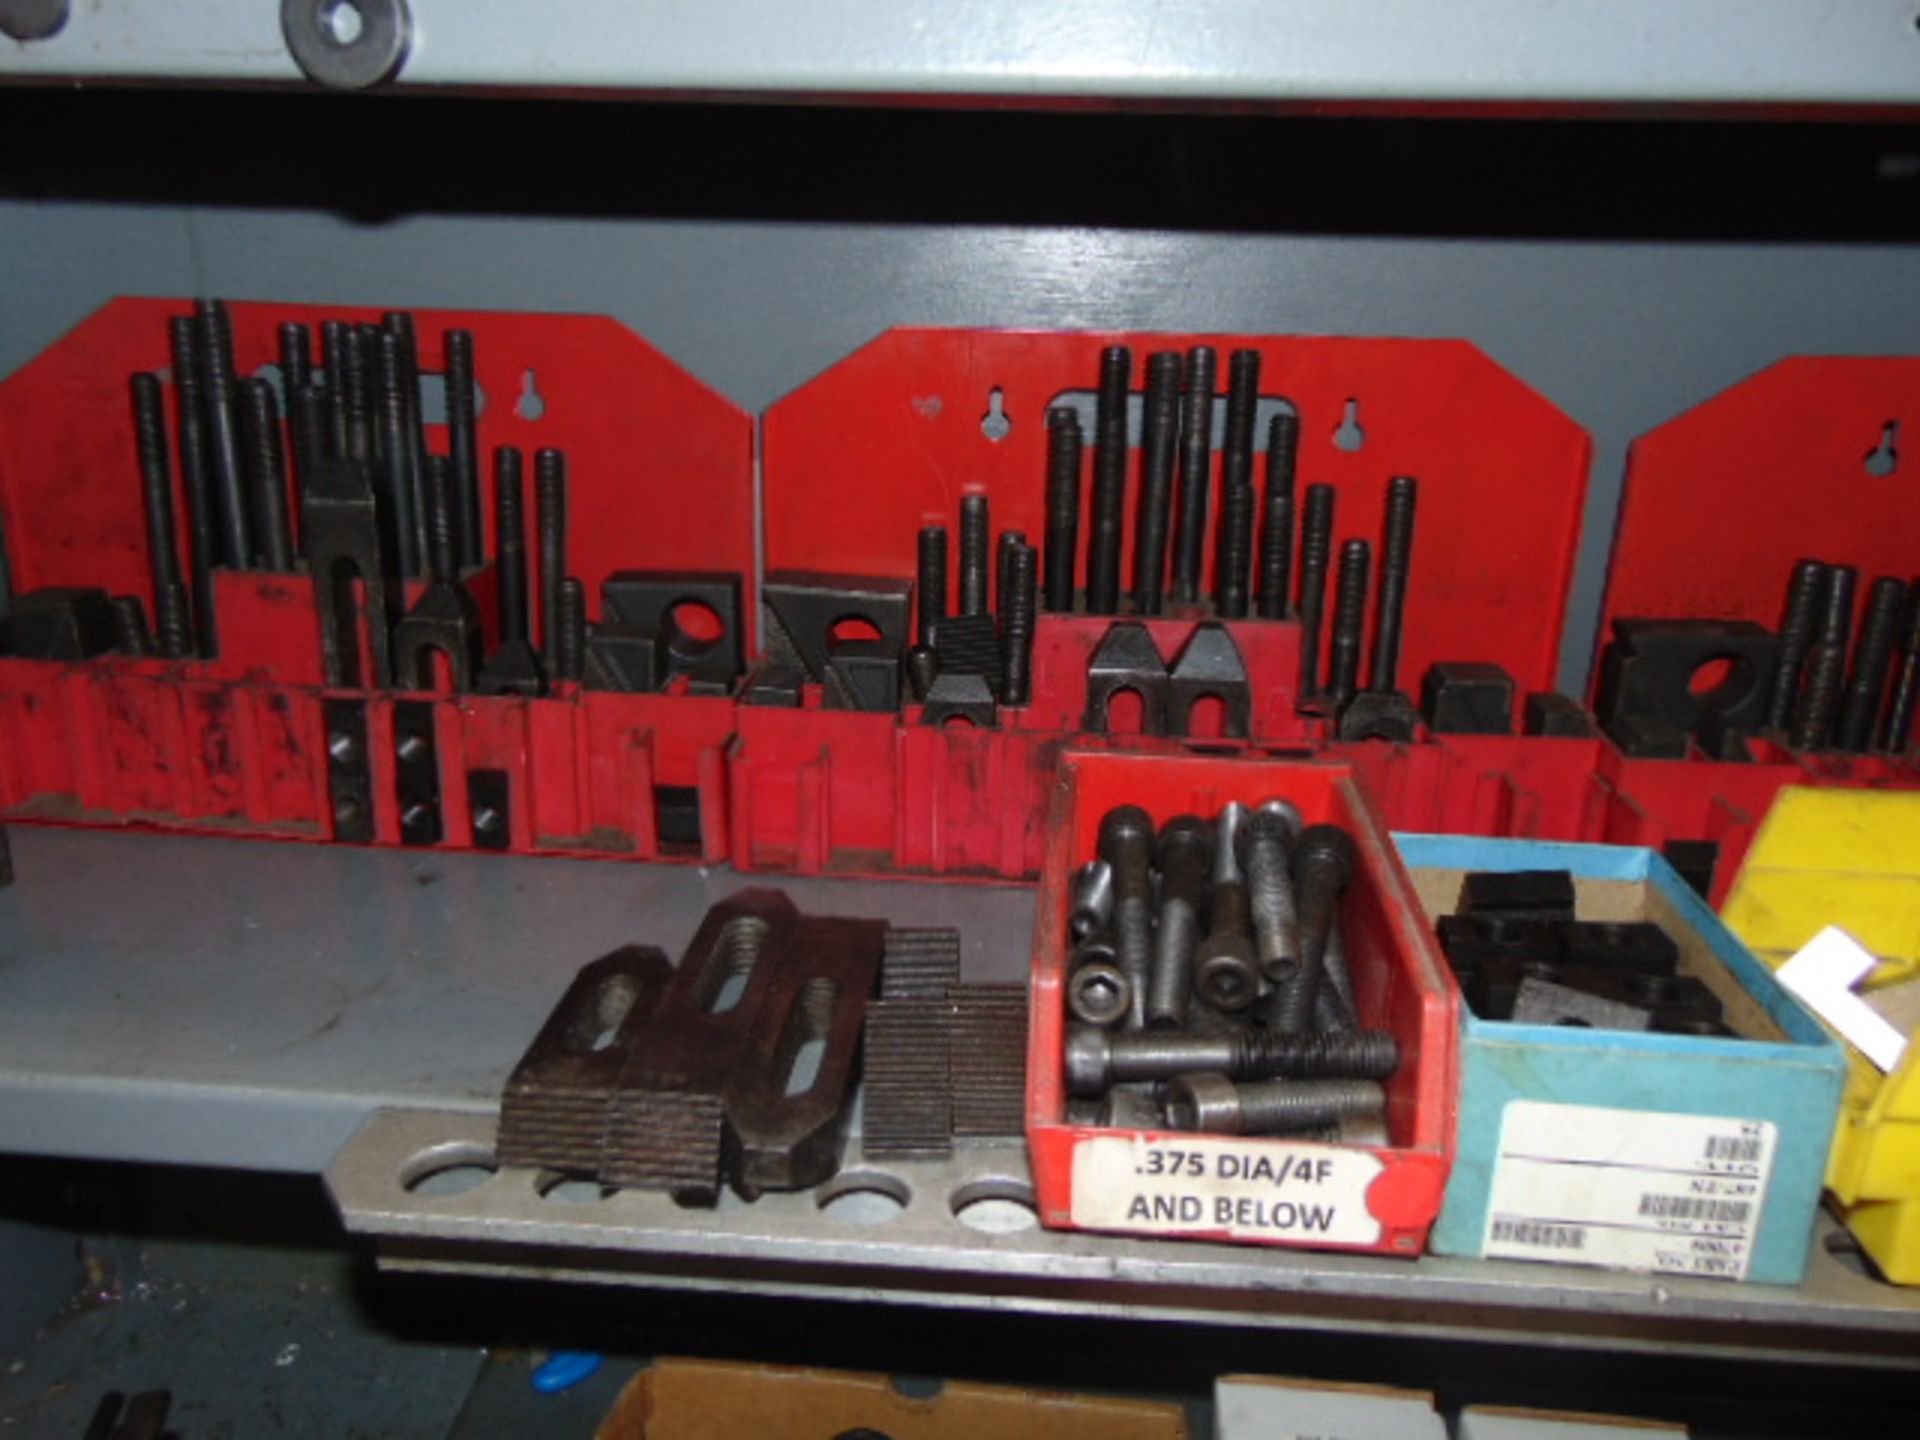 LOT CONSISTING OF: stud sets & hold downs, assorted